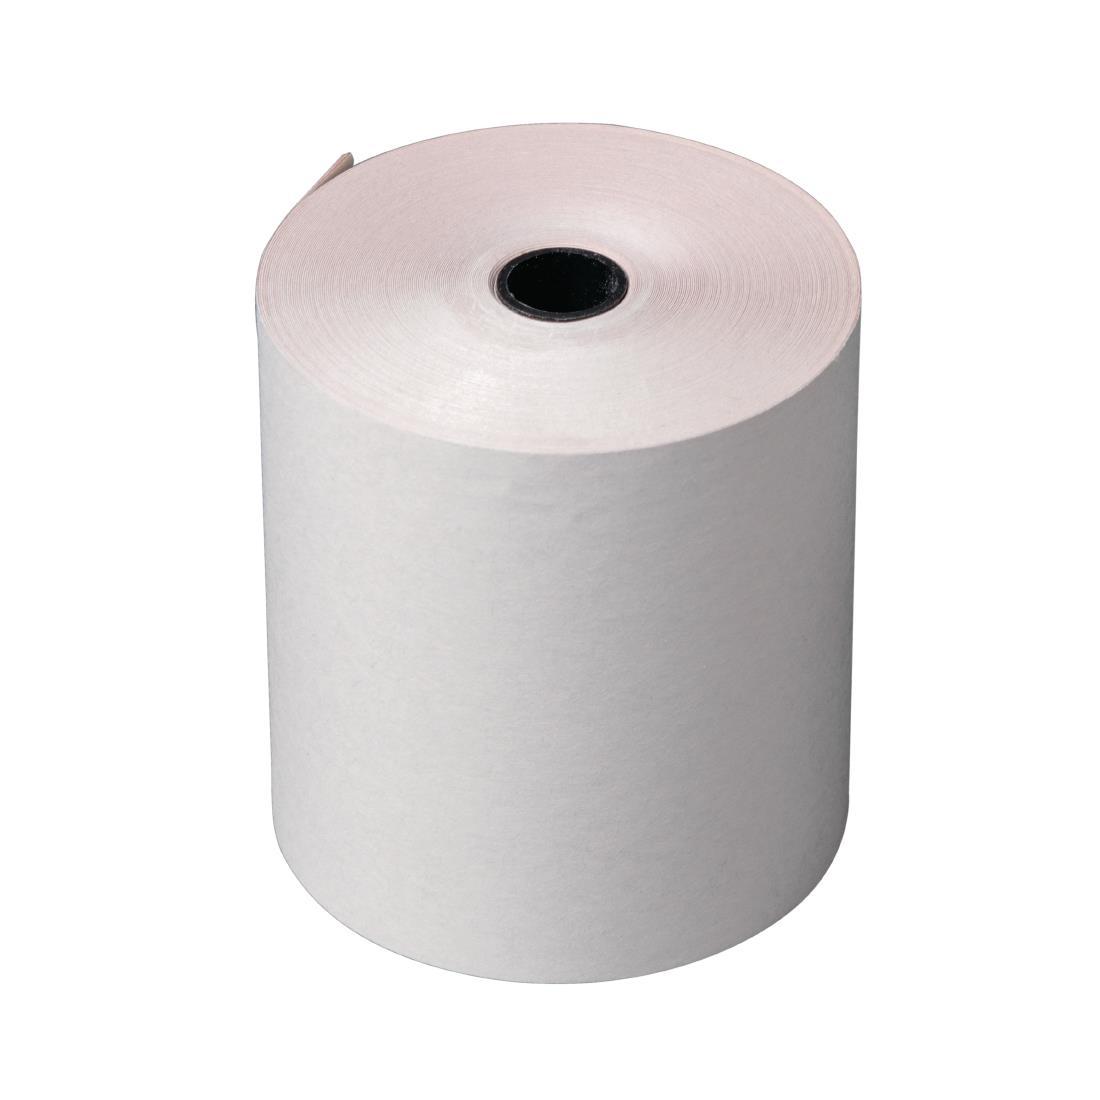 Fiesta Non-Thermal 3ply Till Roll 75 x 70mm (Pack of 20) - DK597  - 4